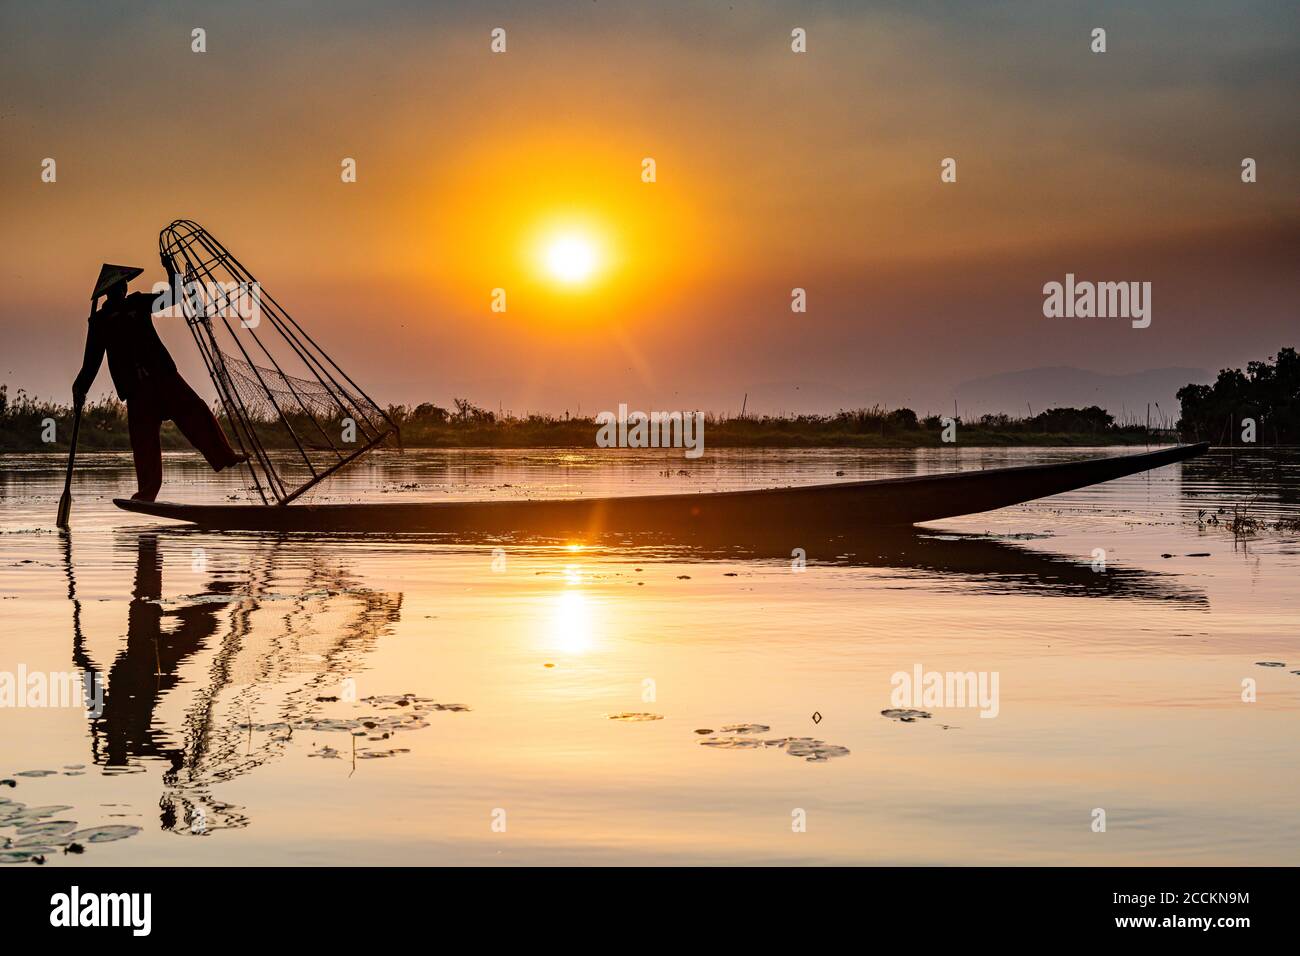 Myanmar, Shan state, Silhouette of traditional Intha fisherman on Inle lake at sunset Stock Photo